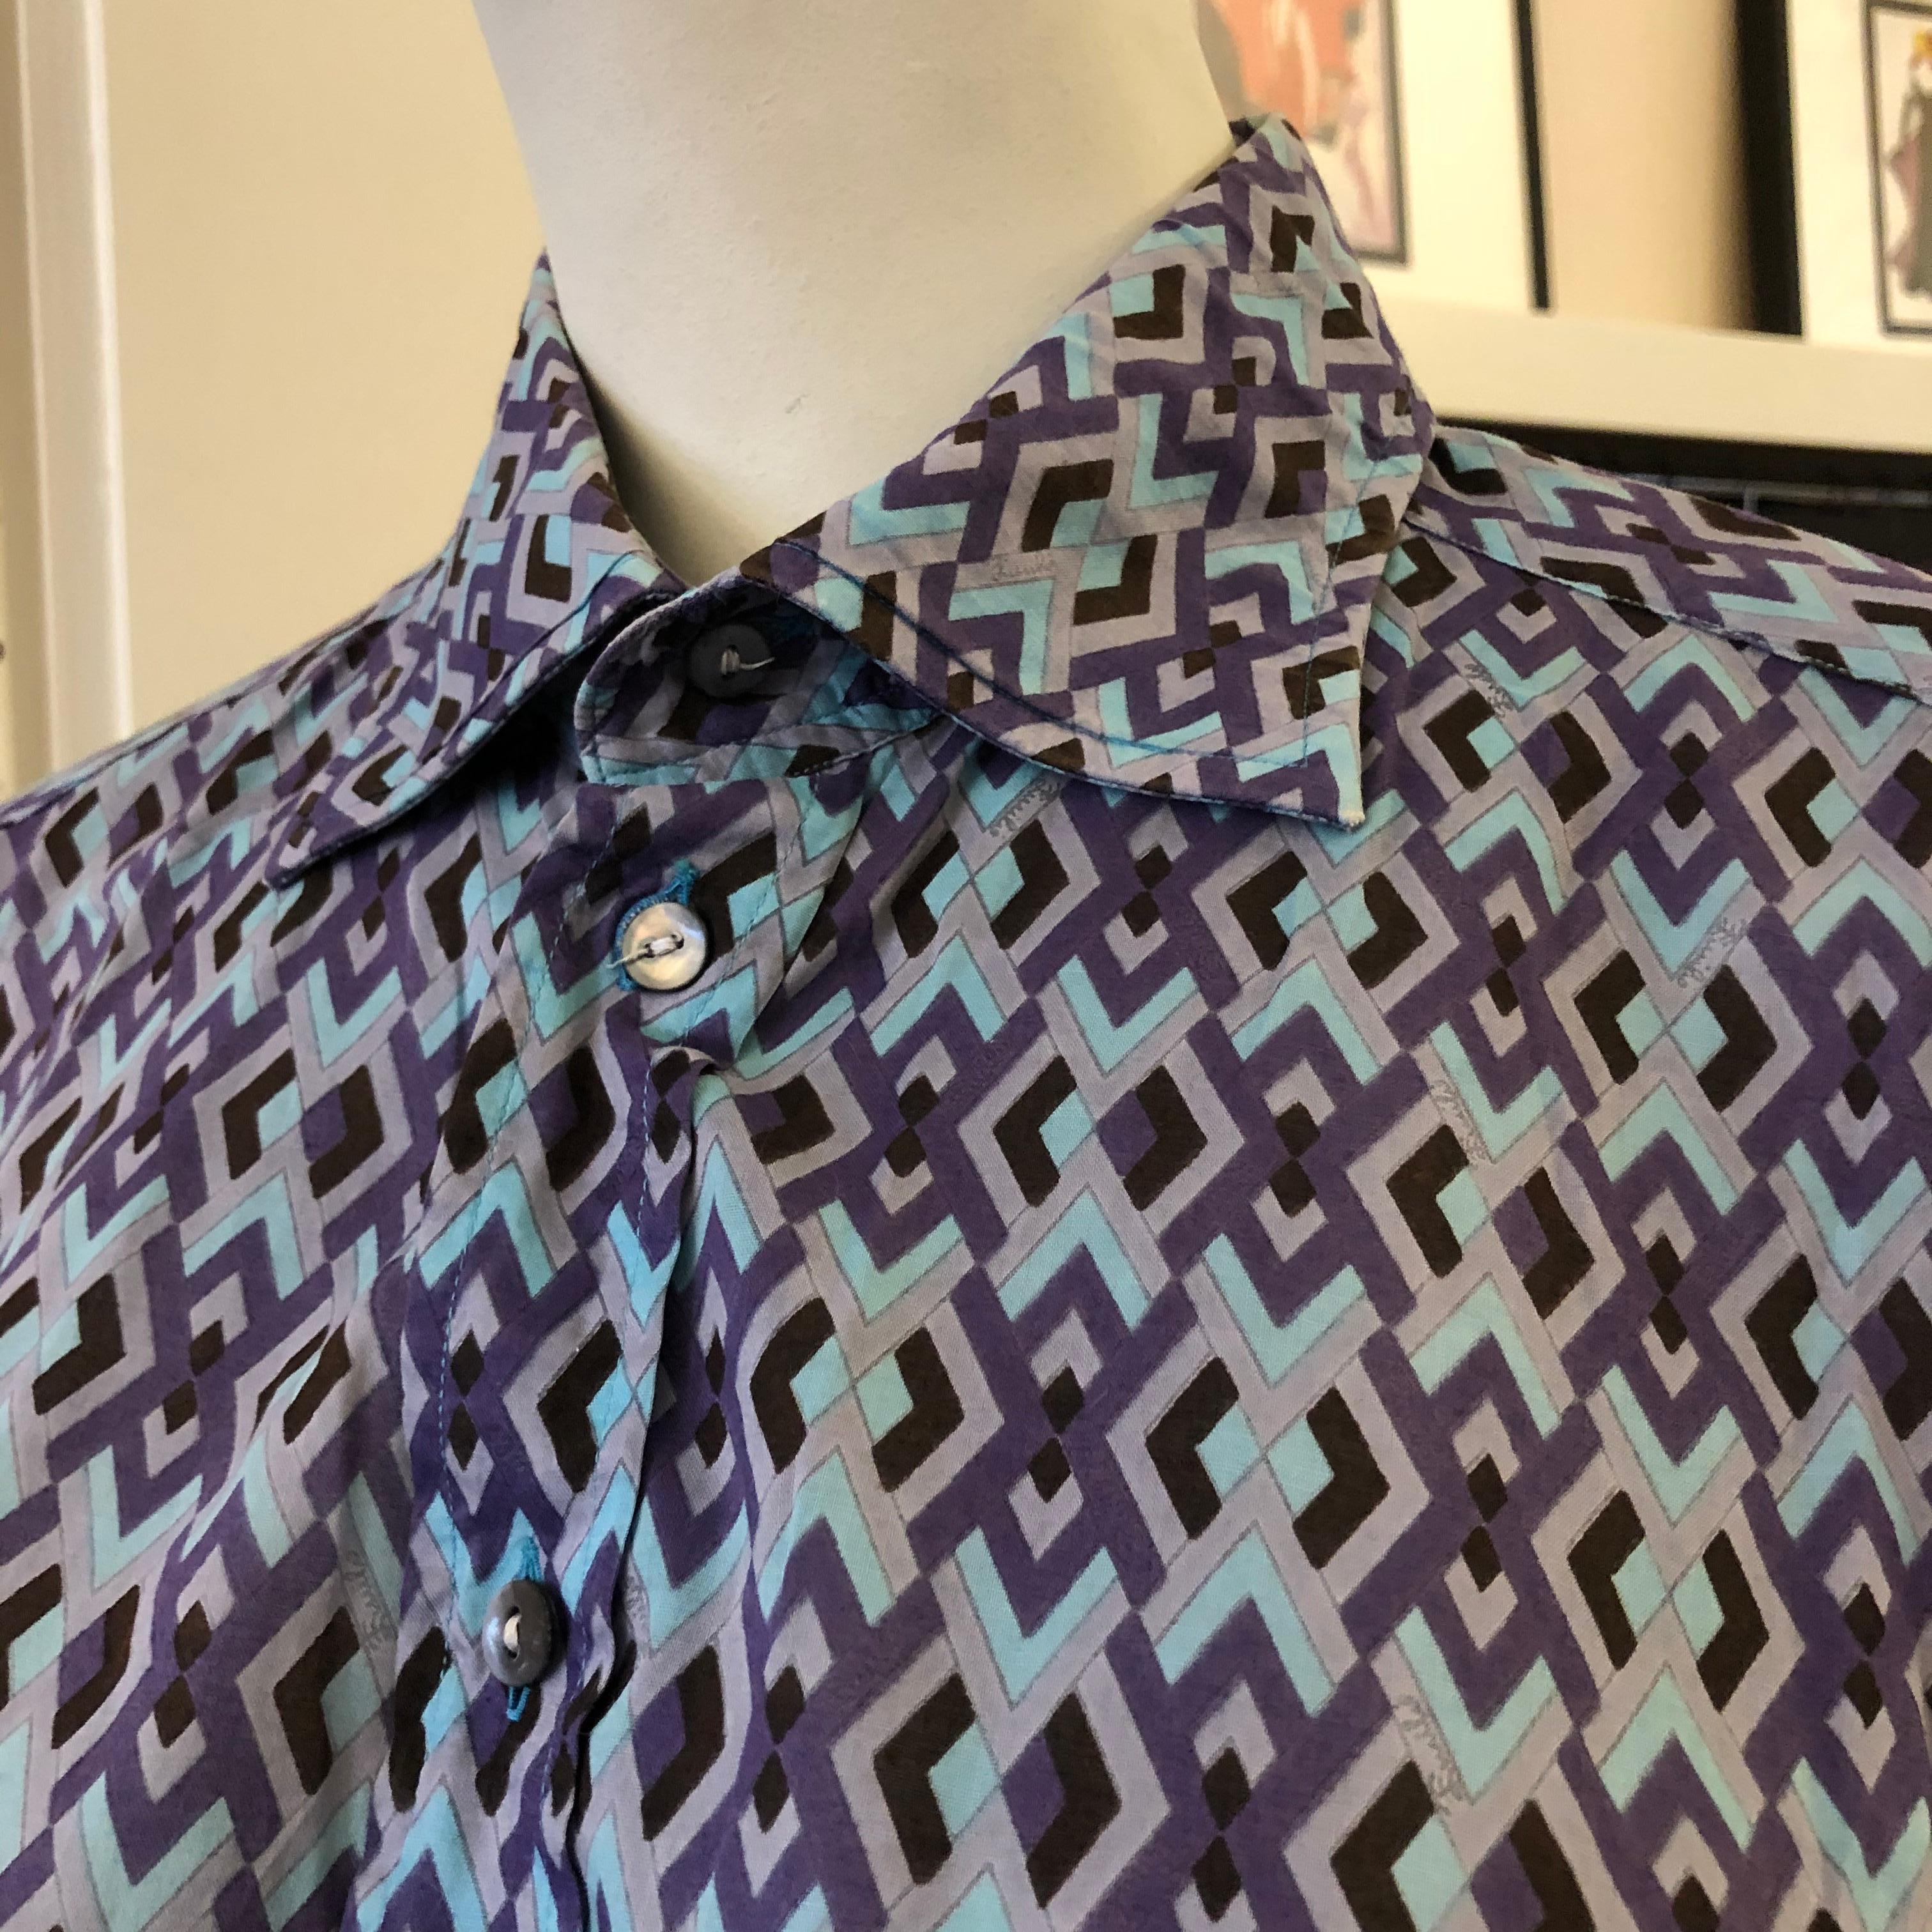 This Emilio Pucci men's shirt has a geometric diamond pattern, reminiscent of the late 60s early 70s. It is of very good vintage condition with side vents, nacre buttons and signed.  The primary colors are aqua and a flight of purples.